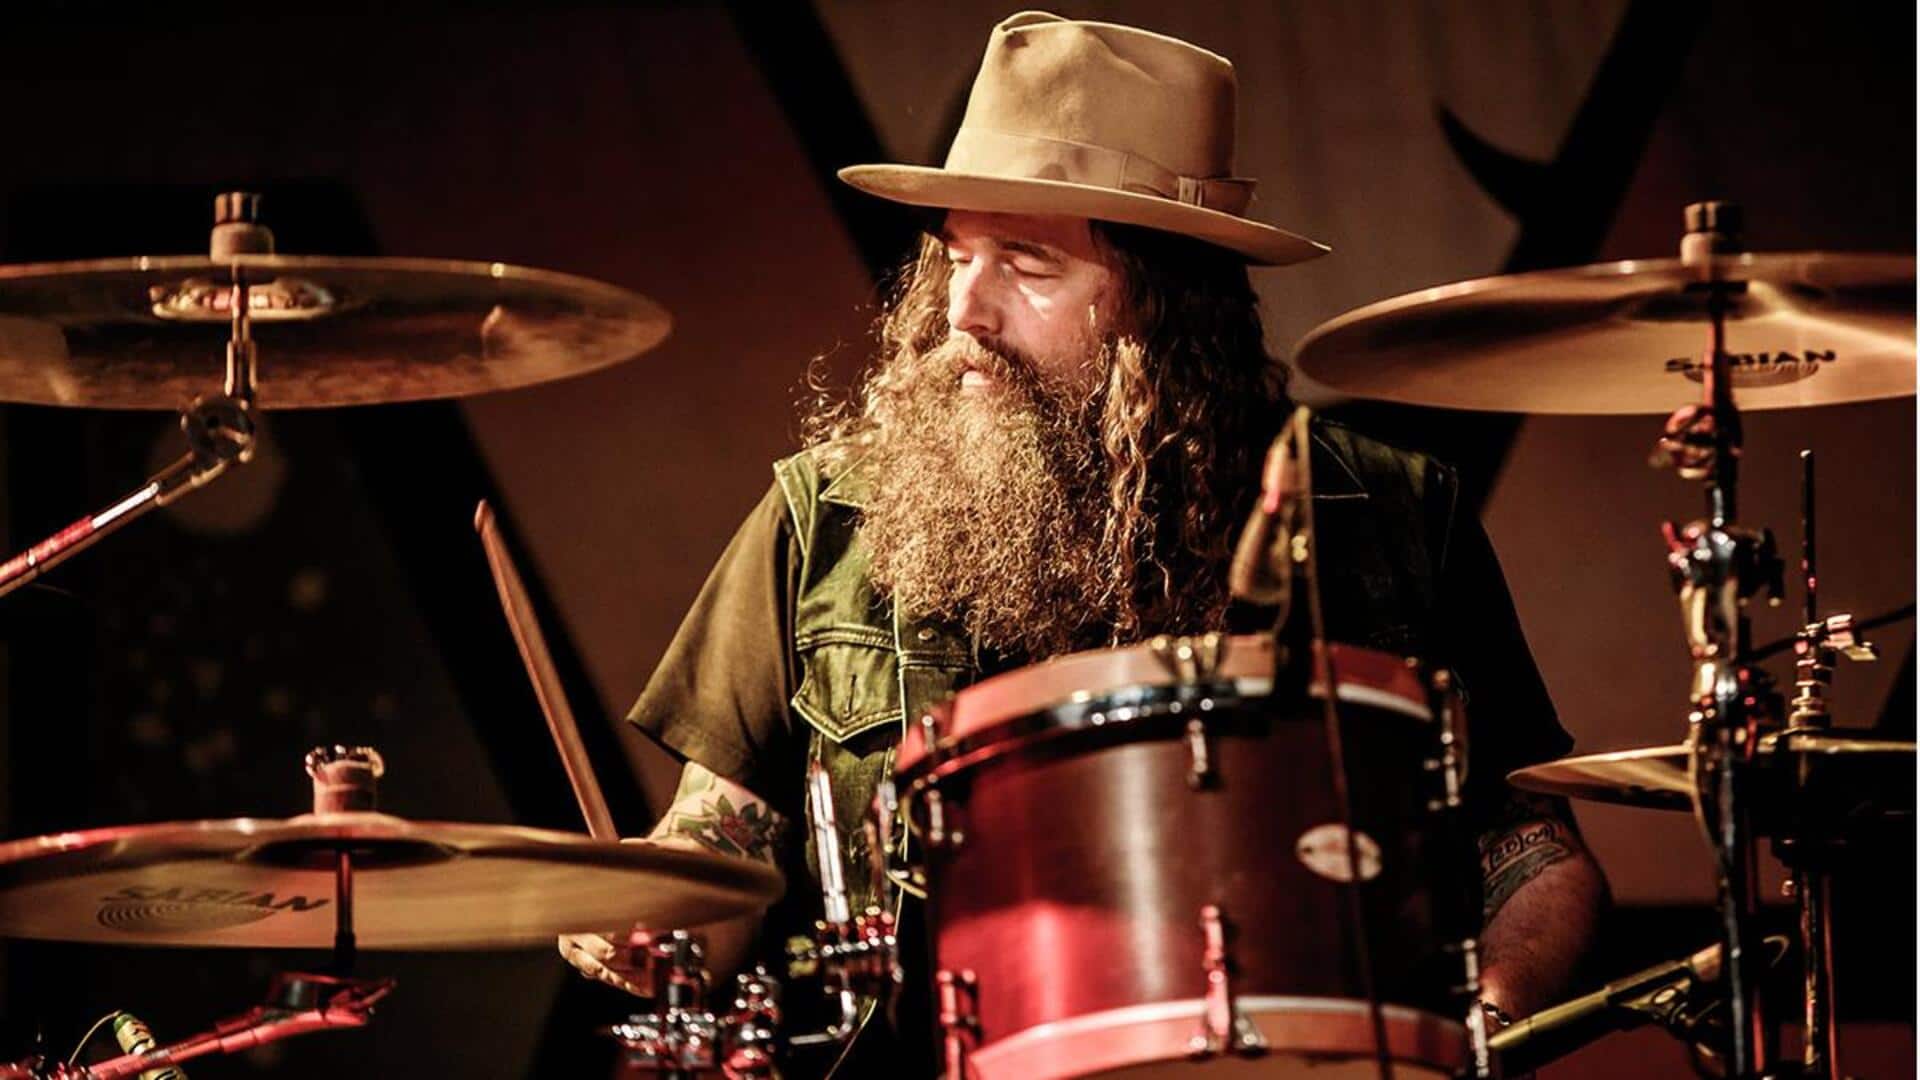 What caused the death of Blackberry Smoke drummer Brit Turner